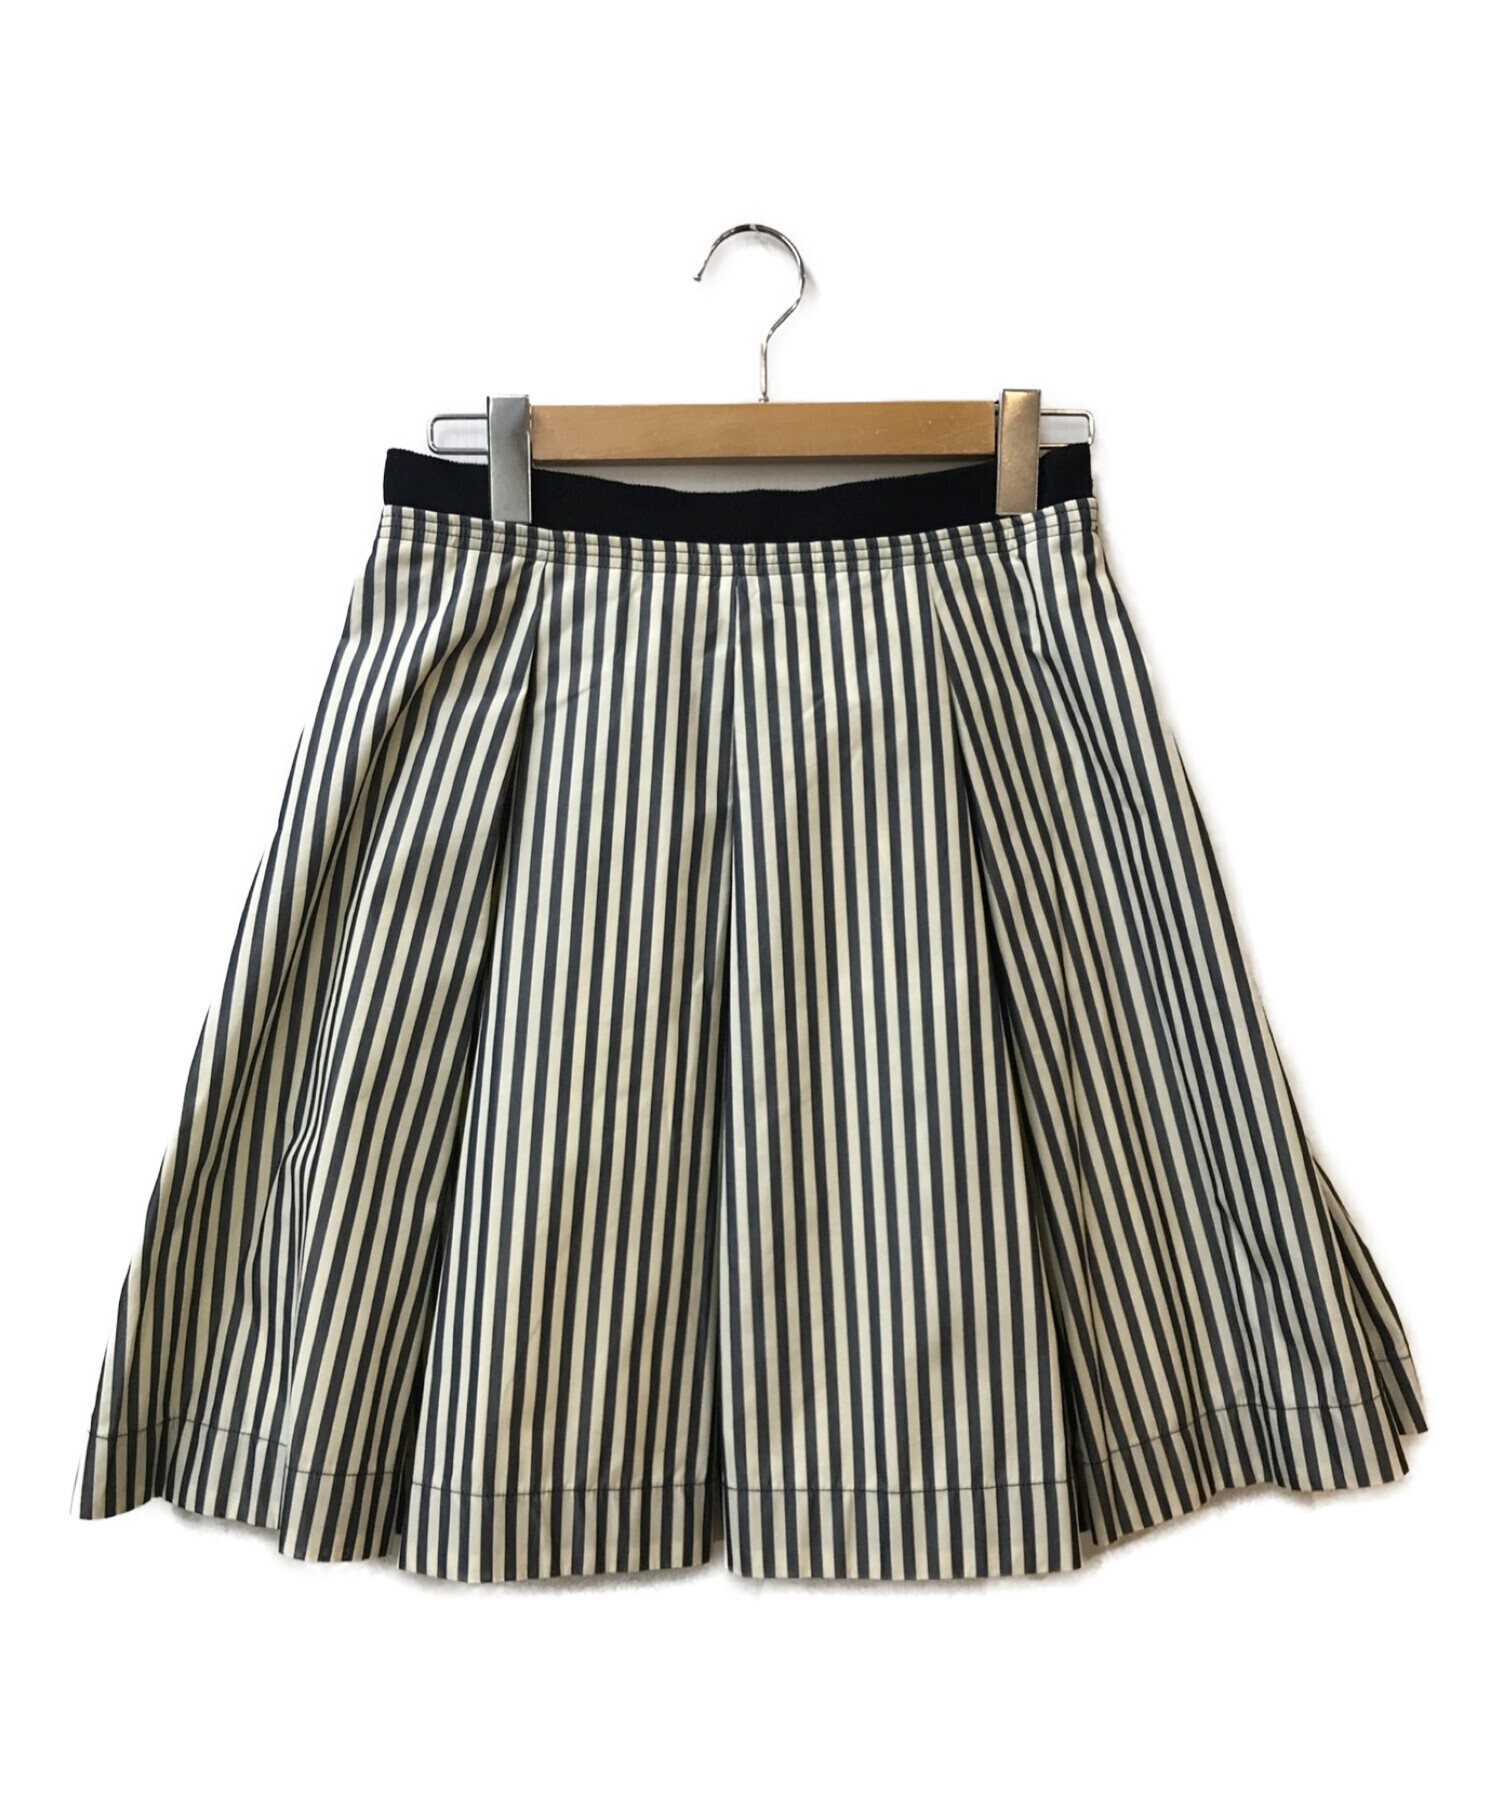 MONCLER (モンクレール) Navy blue Pleated striped skirt ホワイト サイズ:42